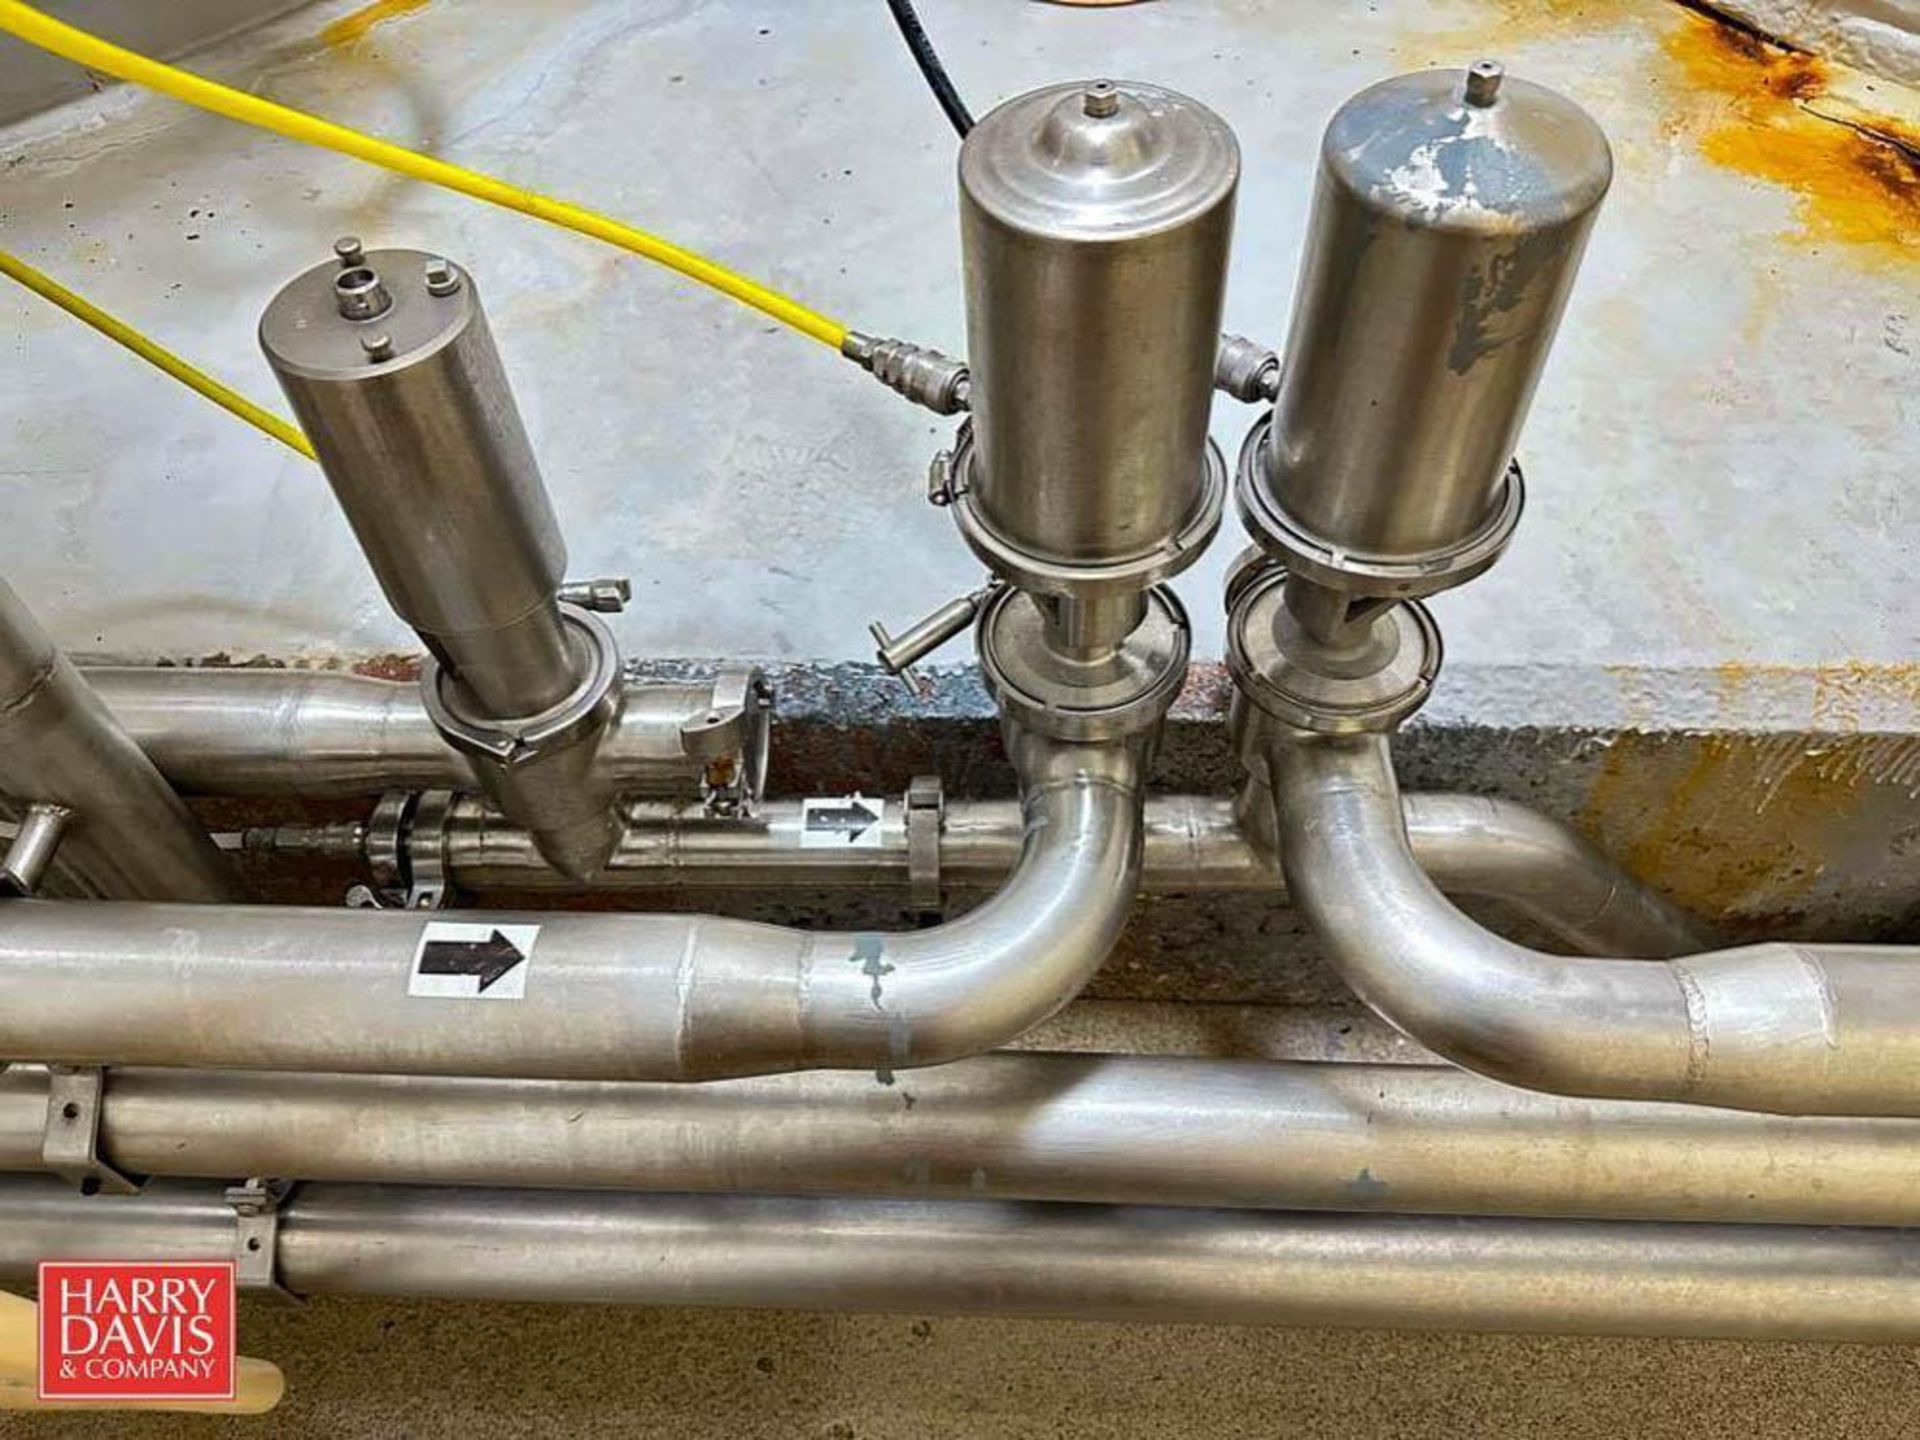 250'+ S/S Piping, (5) S/S Air Valves, Clamps, Fittings and Pipe Hangers - Rigging Fee: $2,300 - Image 3 of 4